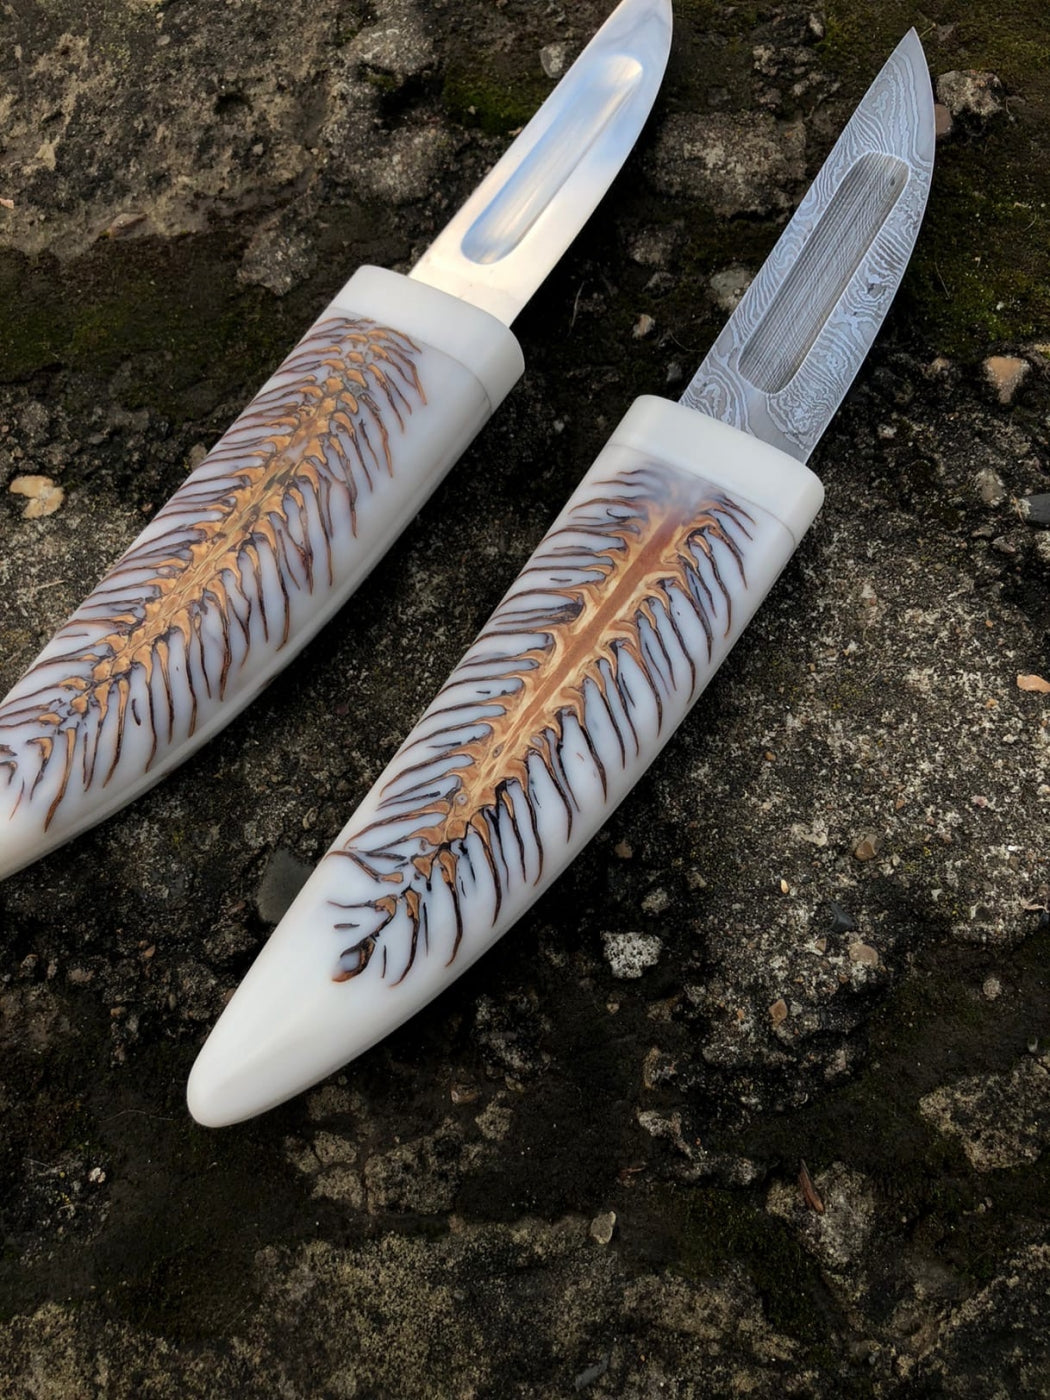 Hunting Knife "Fang" 2 in 1